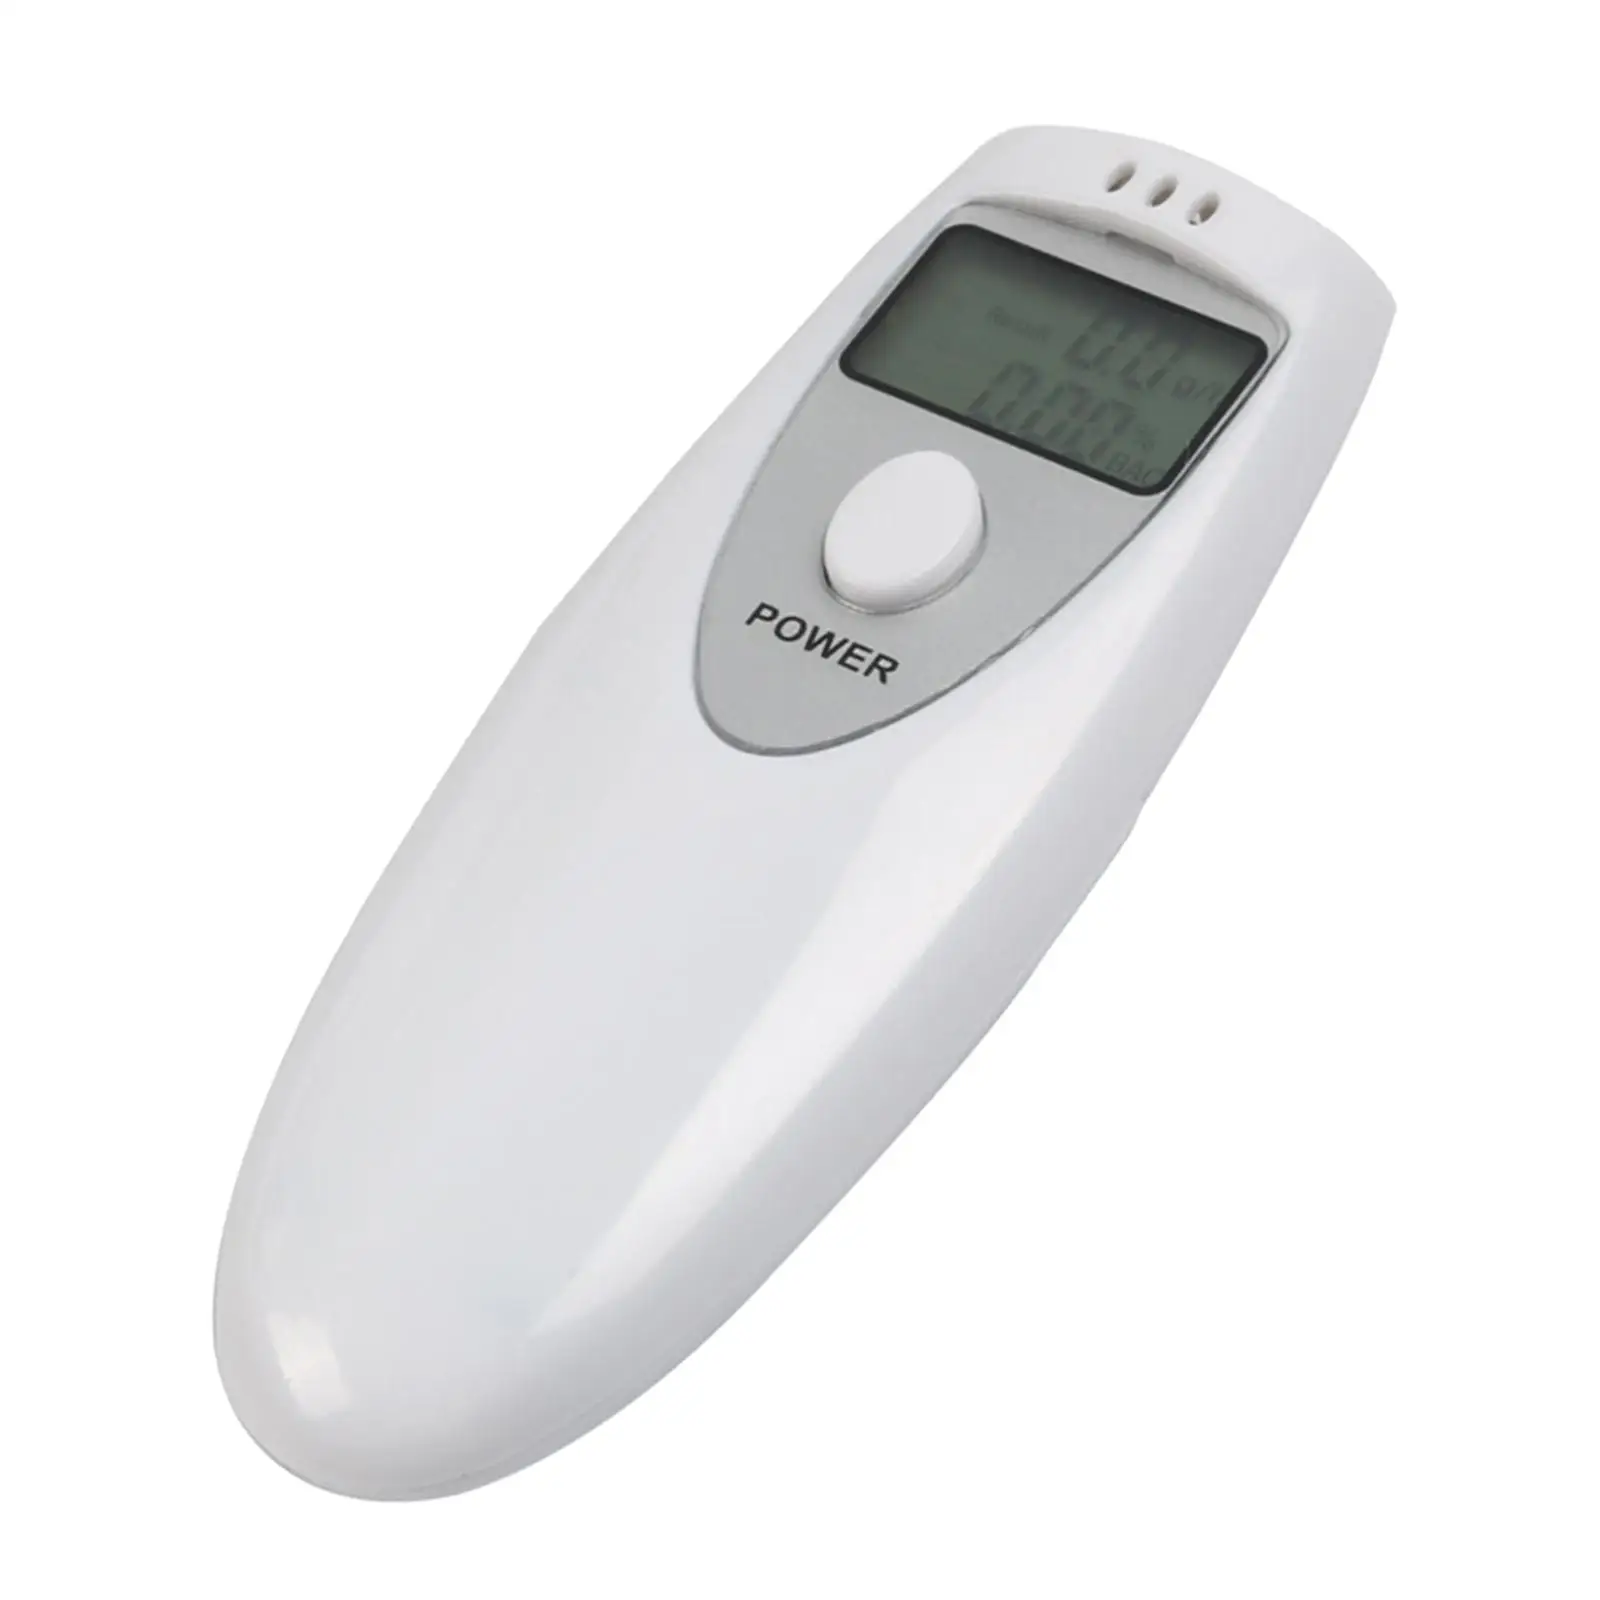 Alcohol Analyzer Alcohol Tester Alcohol Detector Breath Checker , Just Need YOU